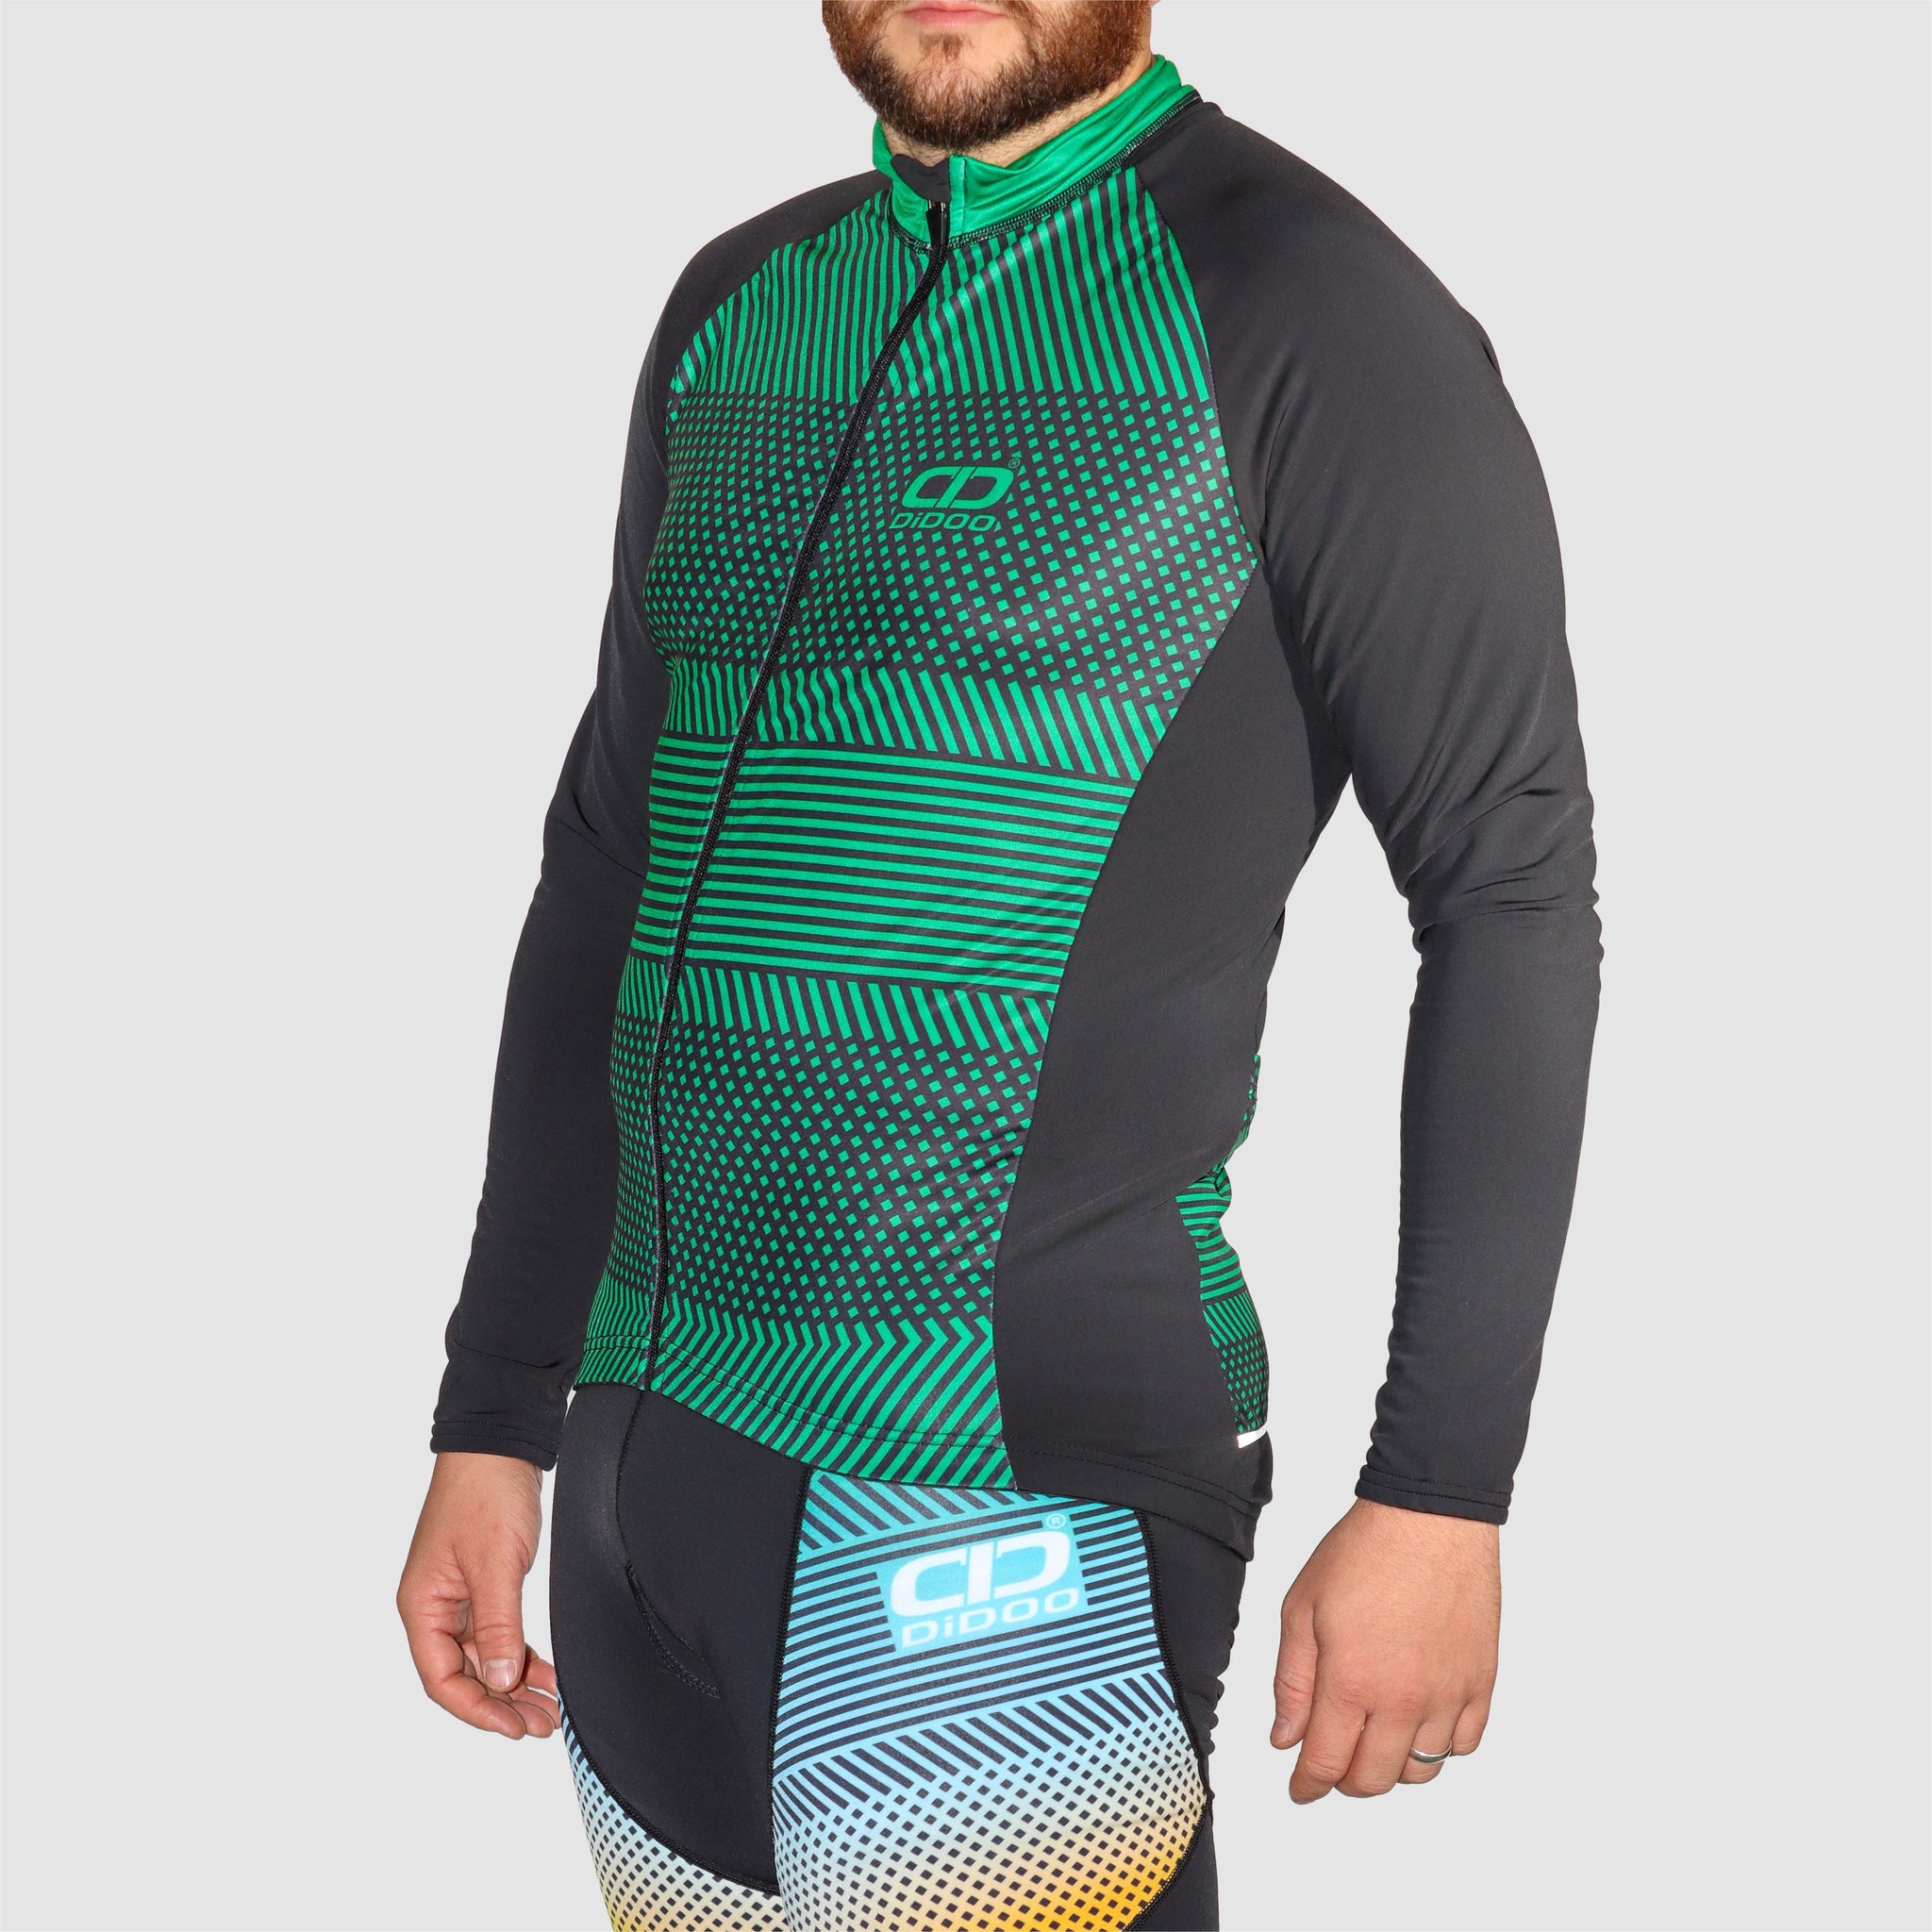 DiDOO Men’s Pro long sleeve winter cycling jersey Black and Green